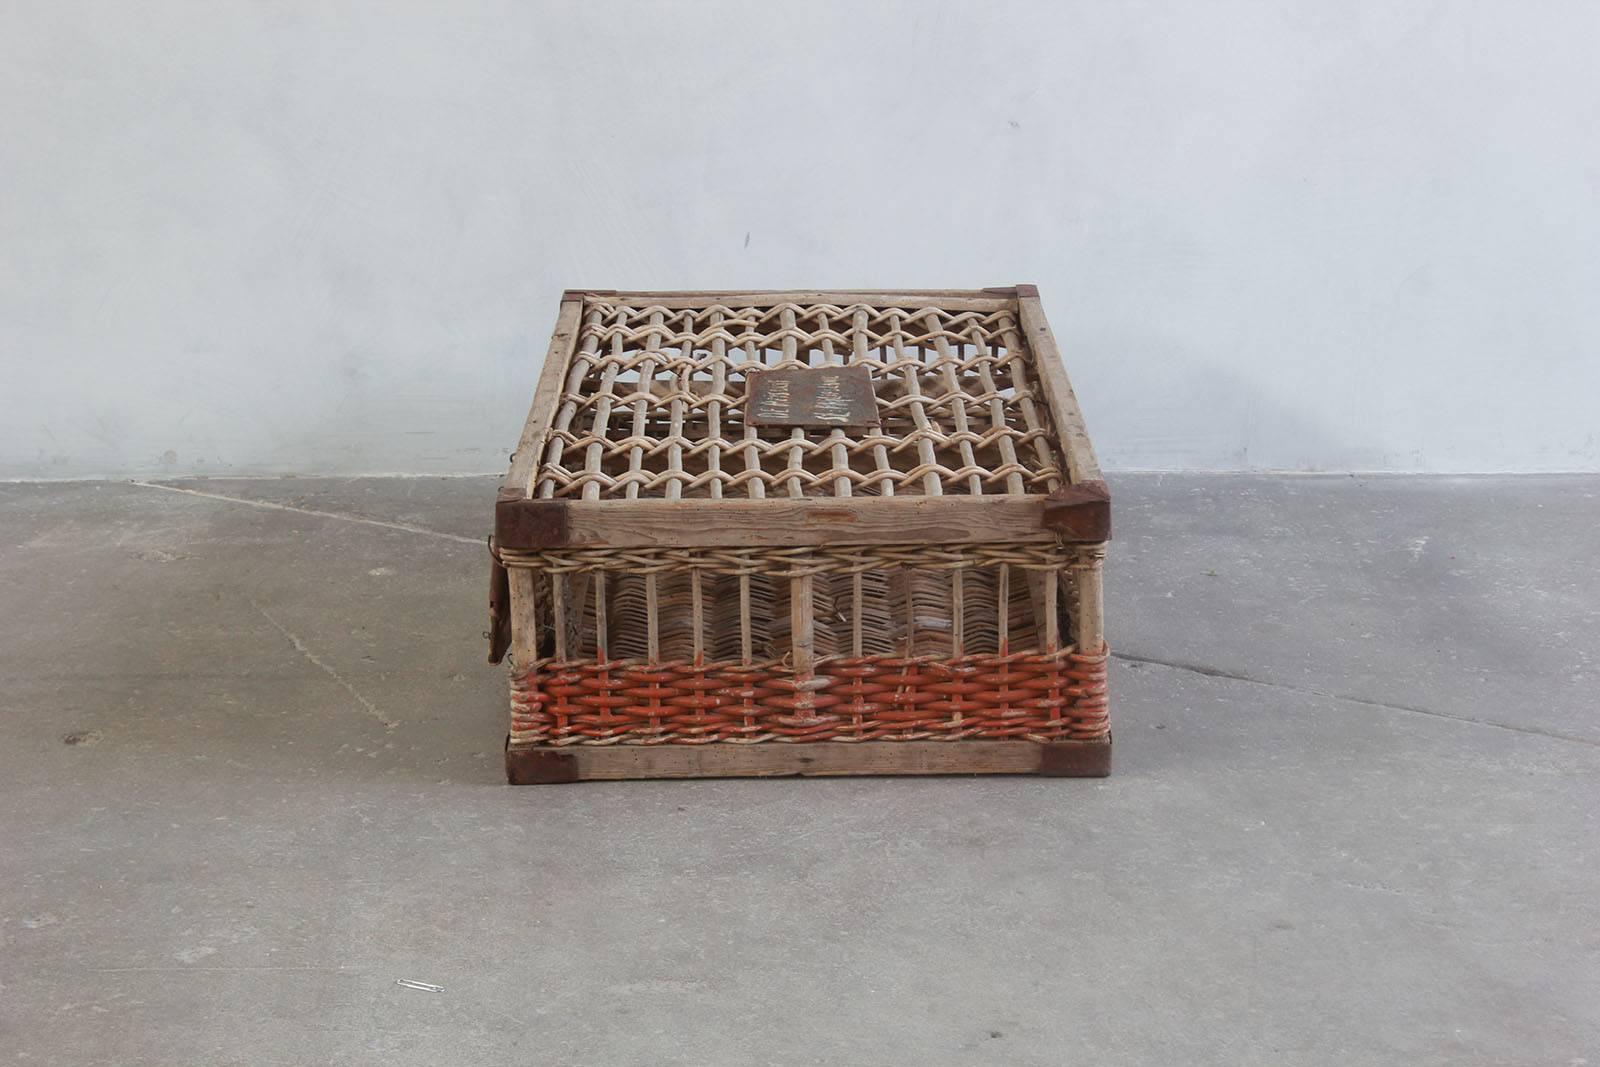 Late 19th Century Woven Pigeon Crate with Green White and Orange Painted Details